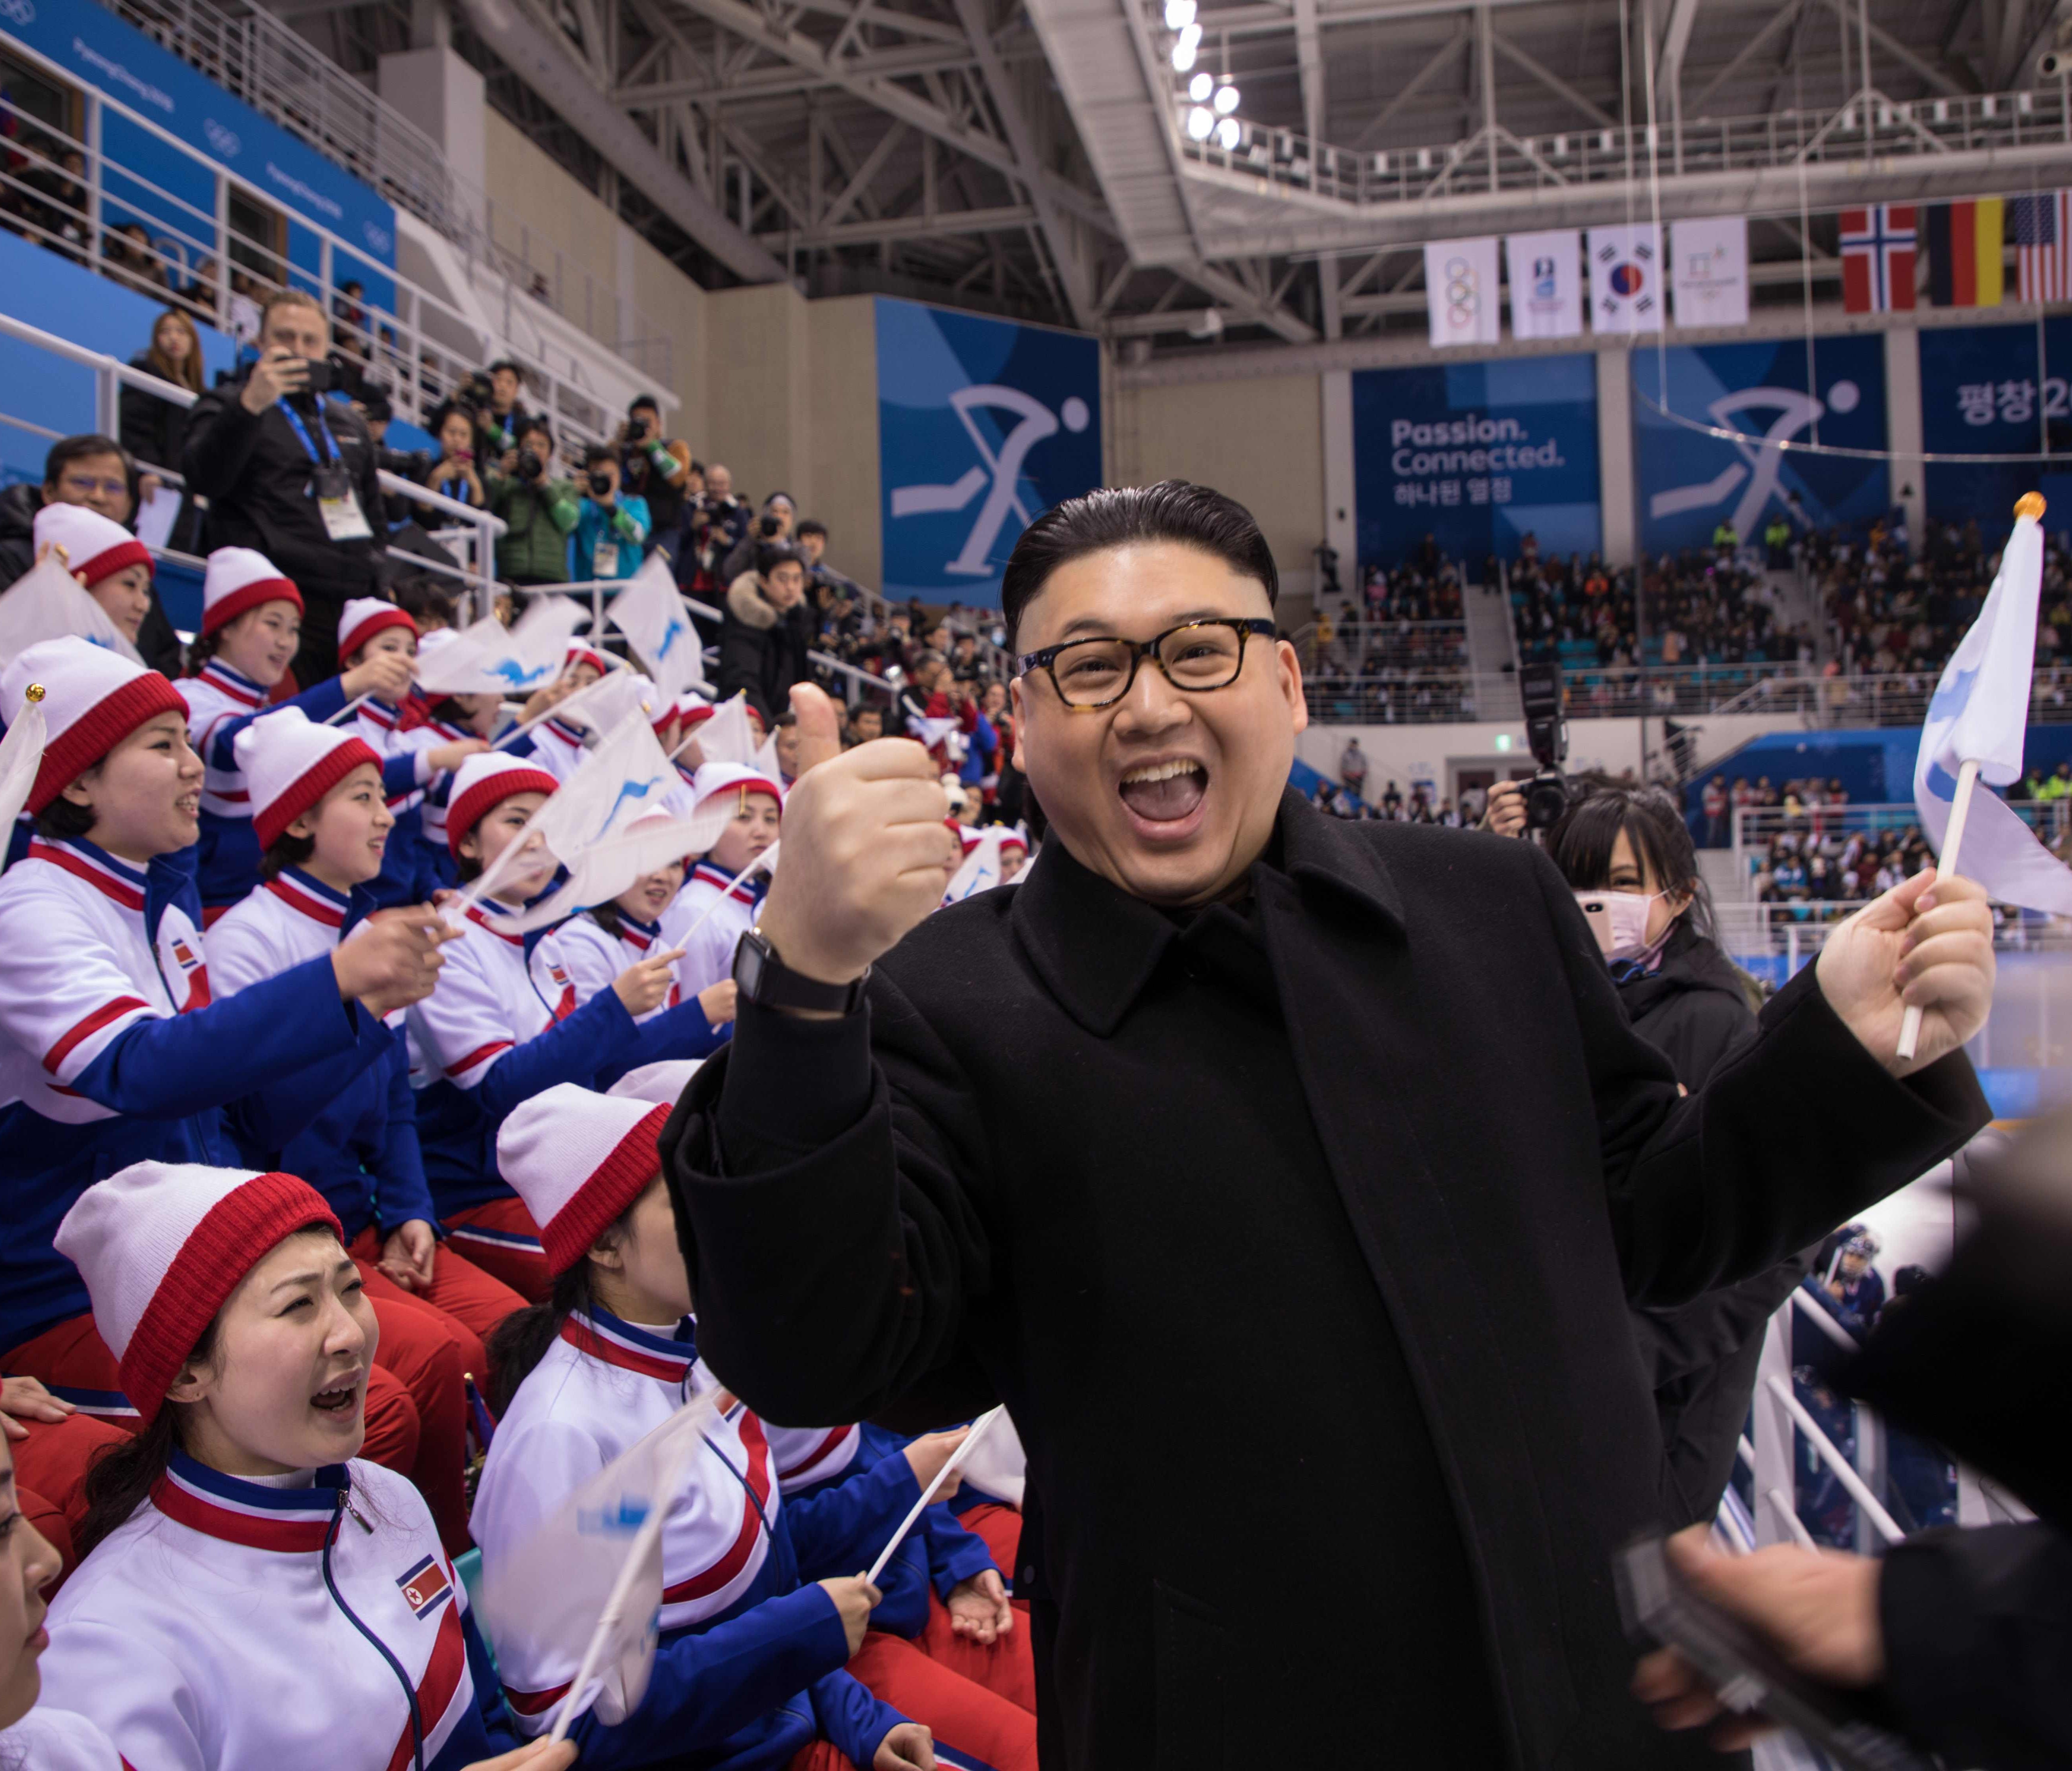 A man impersonating North Korean leader Kim Jong Un gestures as he stands before North Korean cheerleaders attending the Unified Korean ice hockey game against Japan during the Pyeongchang 2018 Winter Olympic Games at the Kwandong Hockey Centre in Ga